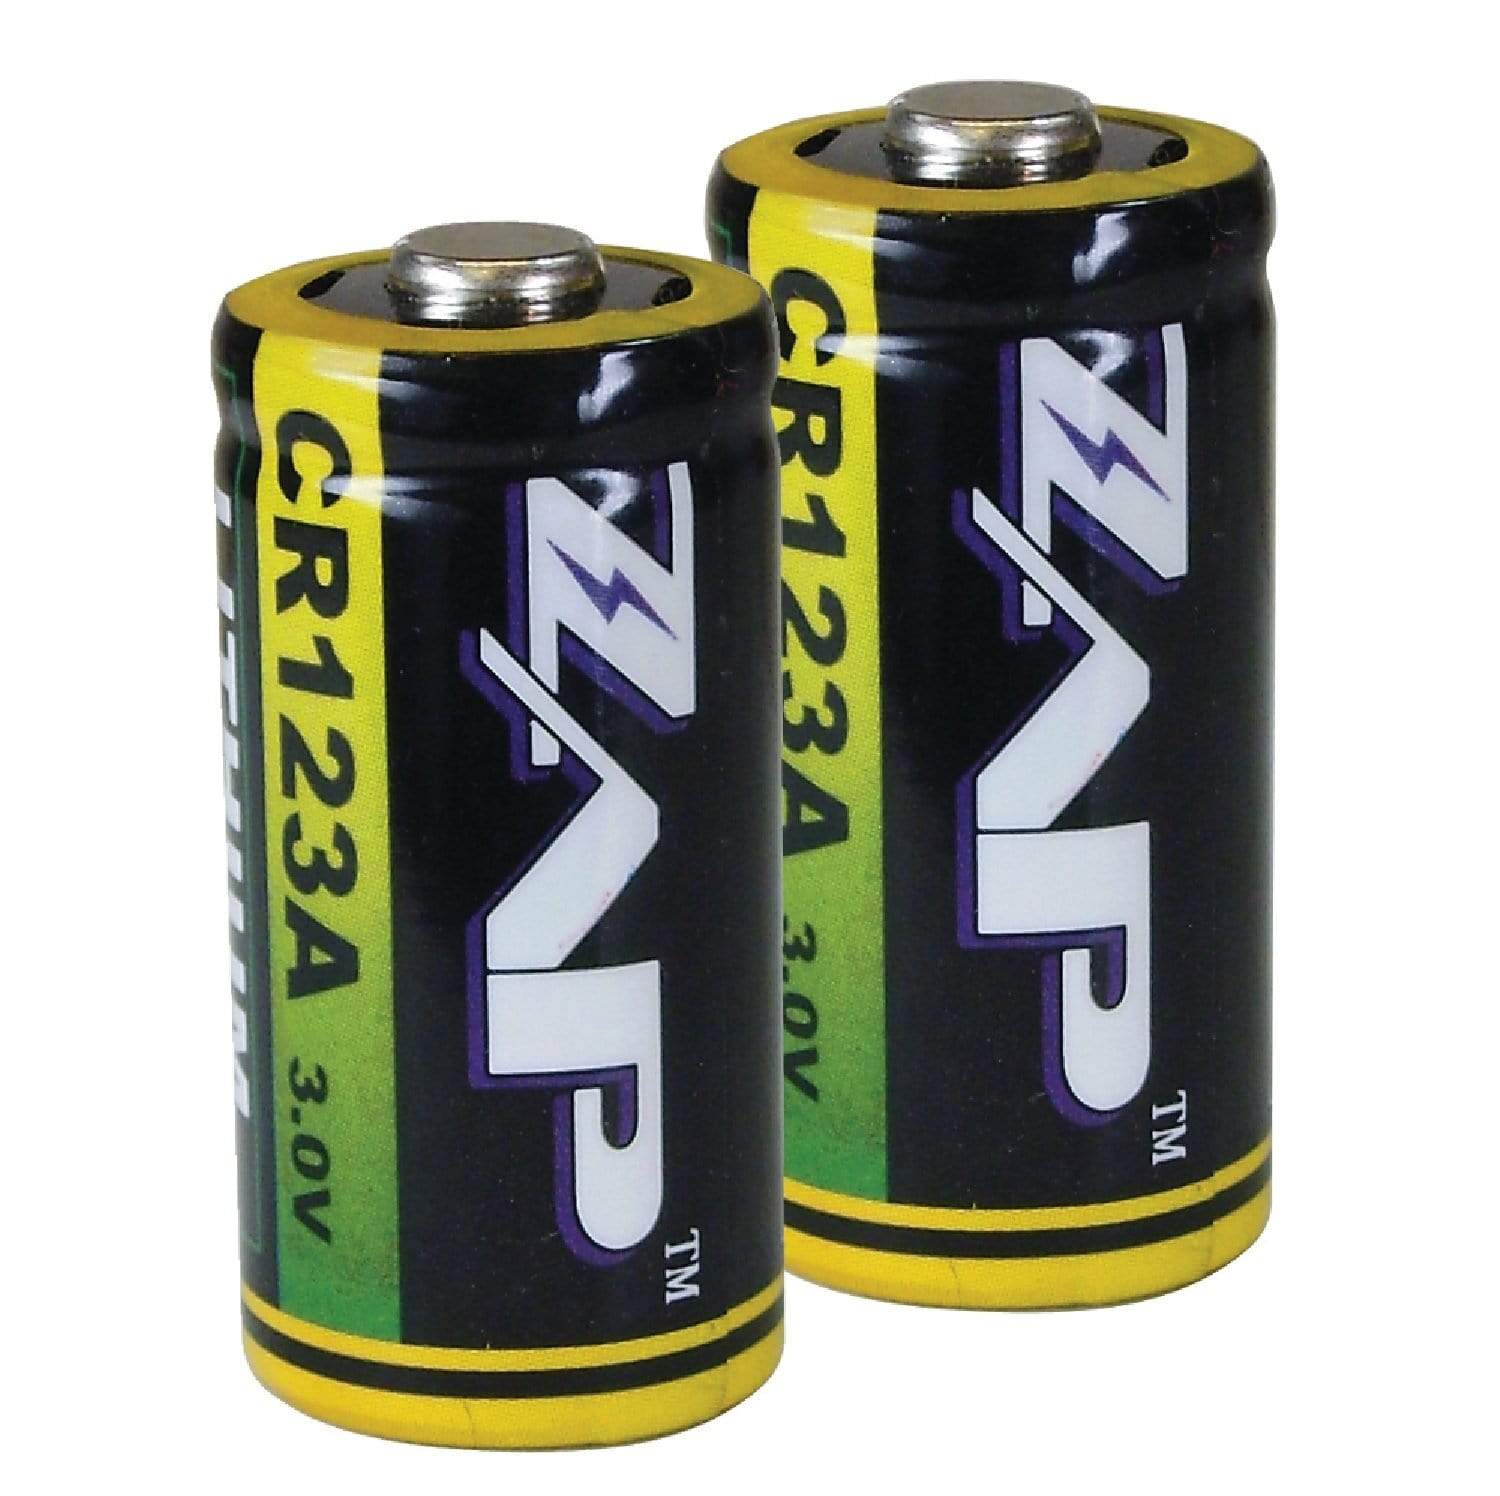 PS Products Lights : Batteries PS Products Lithium CR123A Batteries 2-Pack